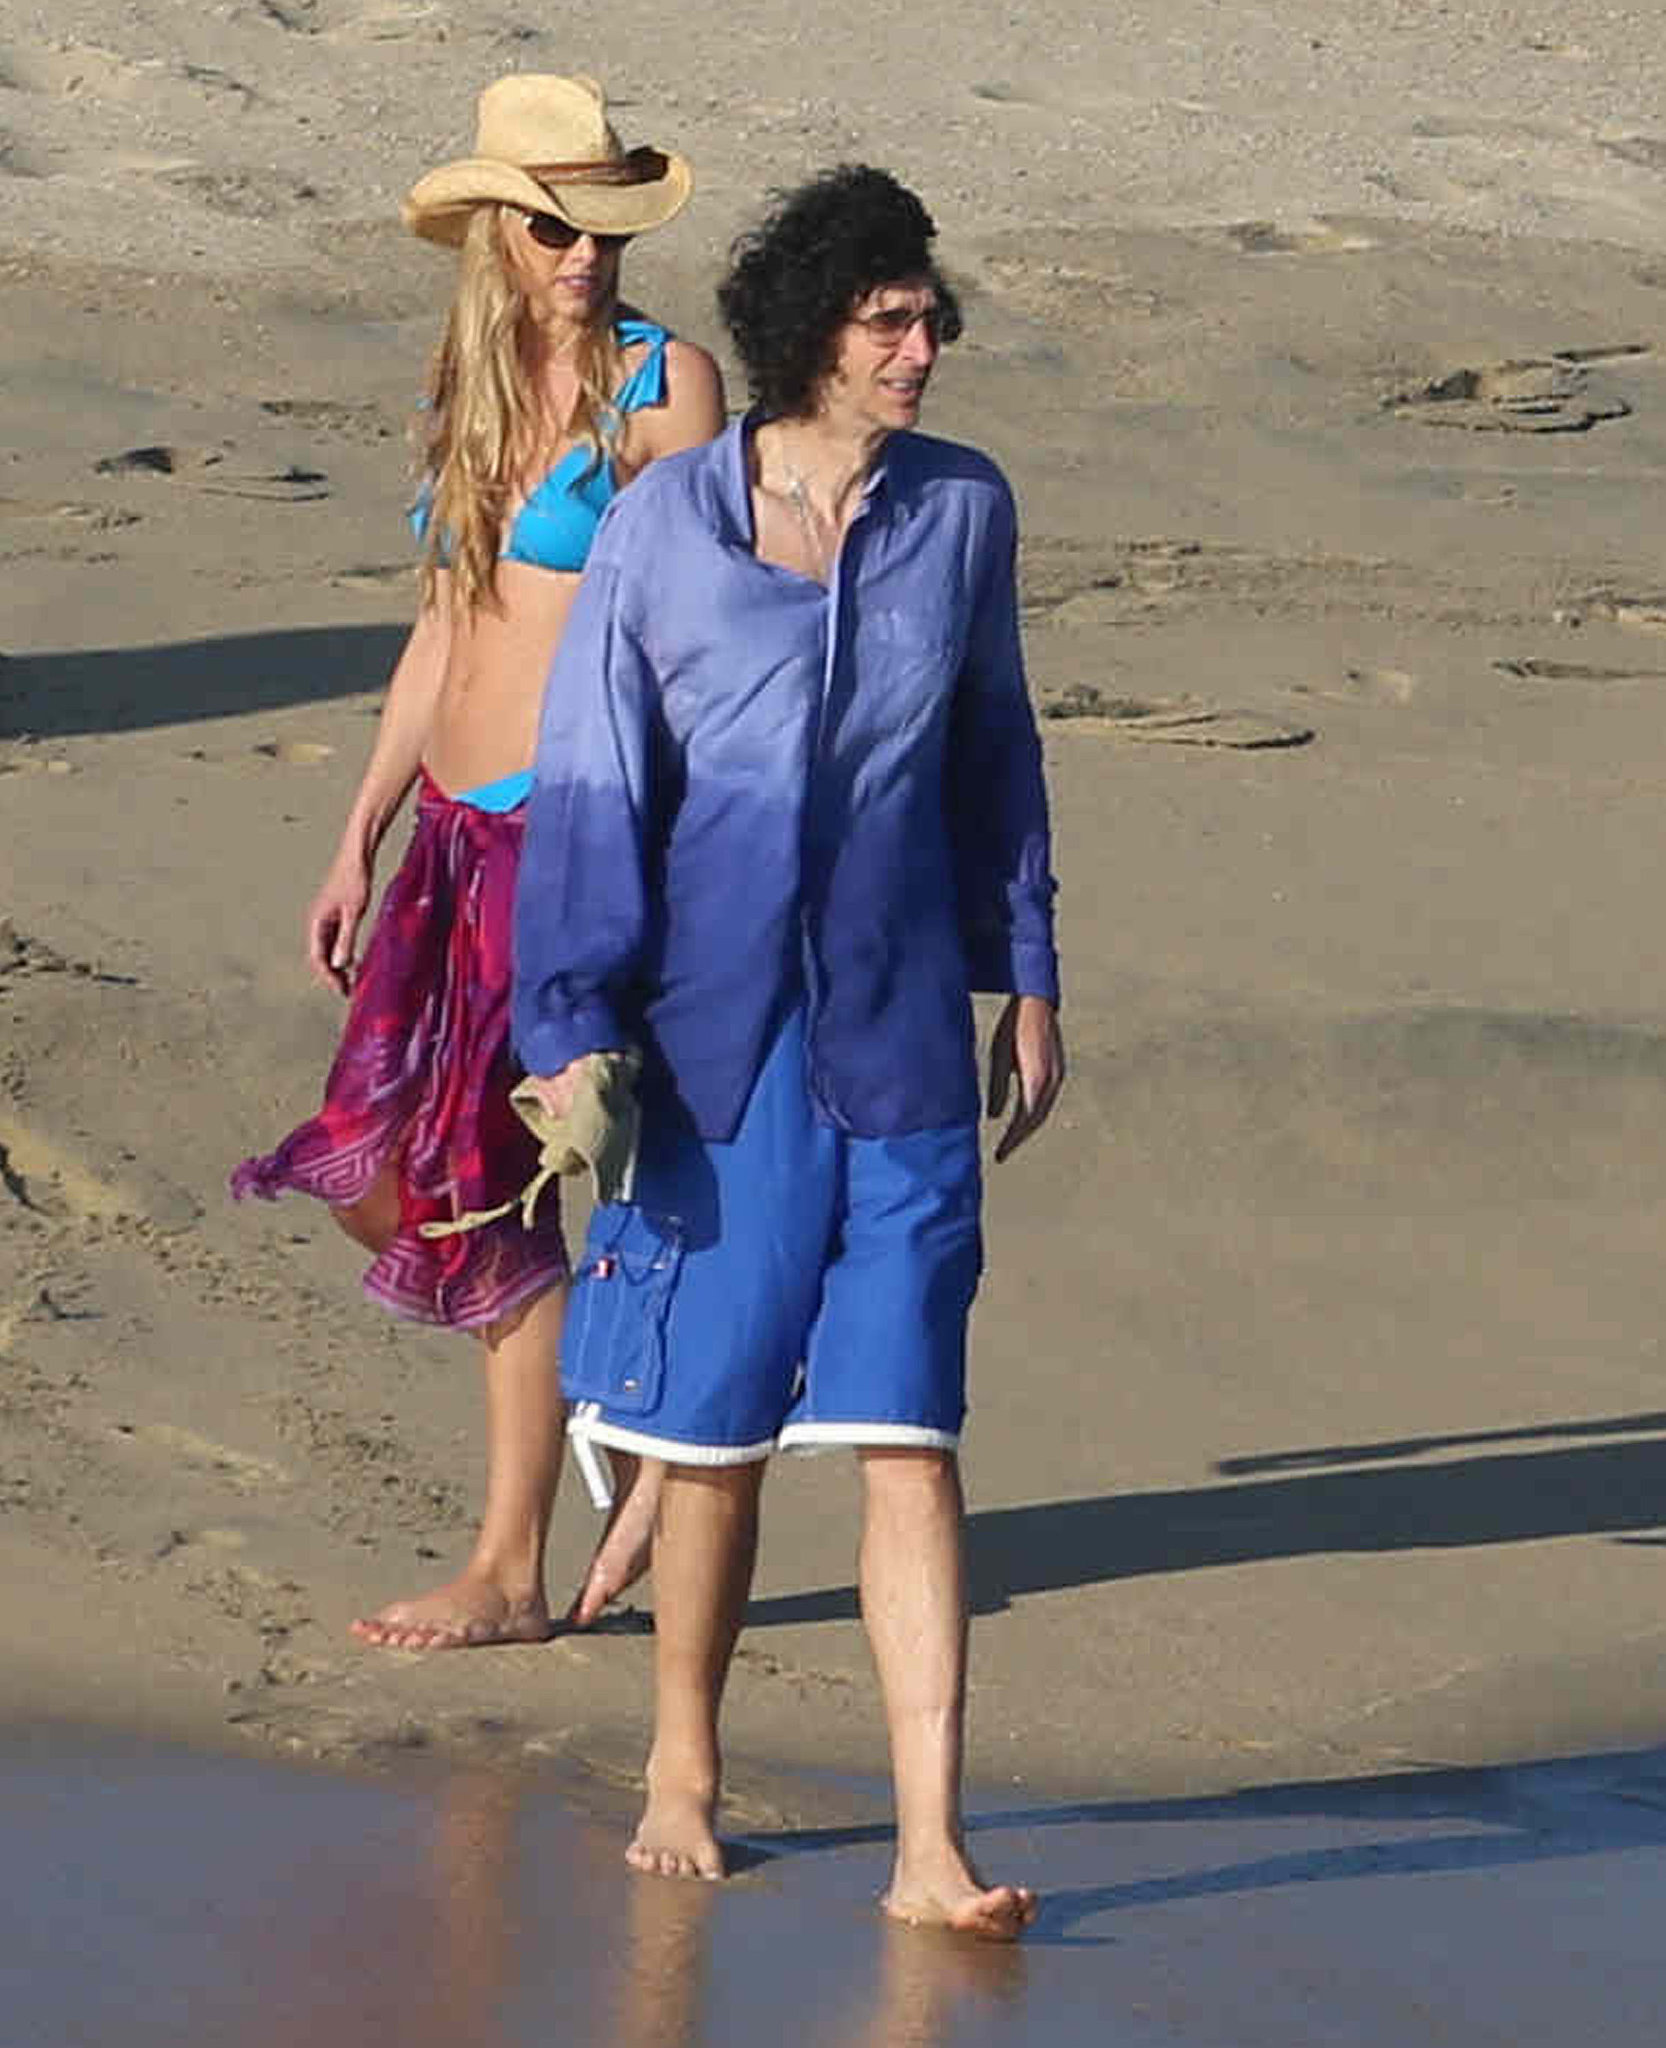 Beth Ostrosky and Howard Stern were among the guests on vacation with